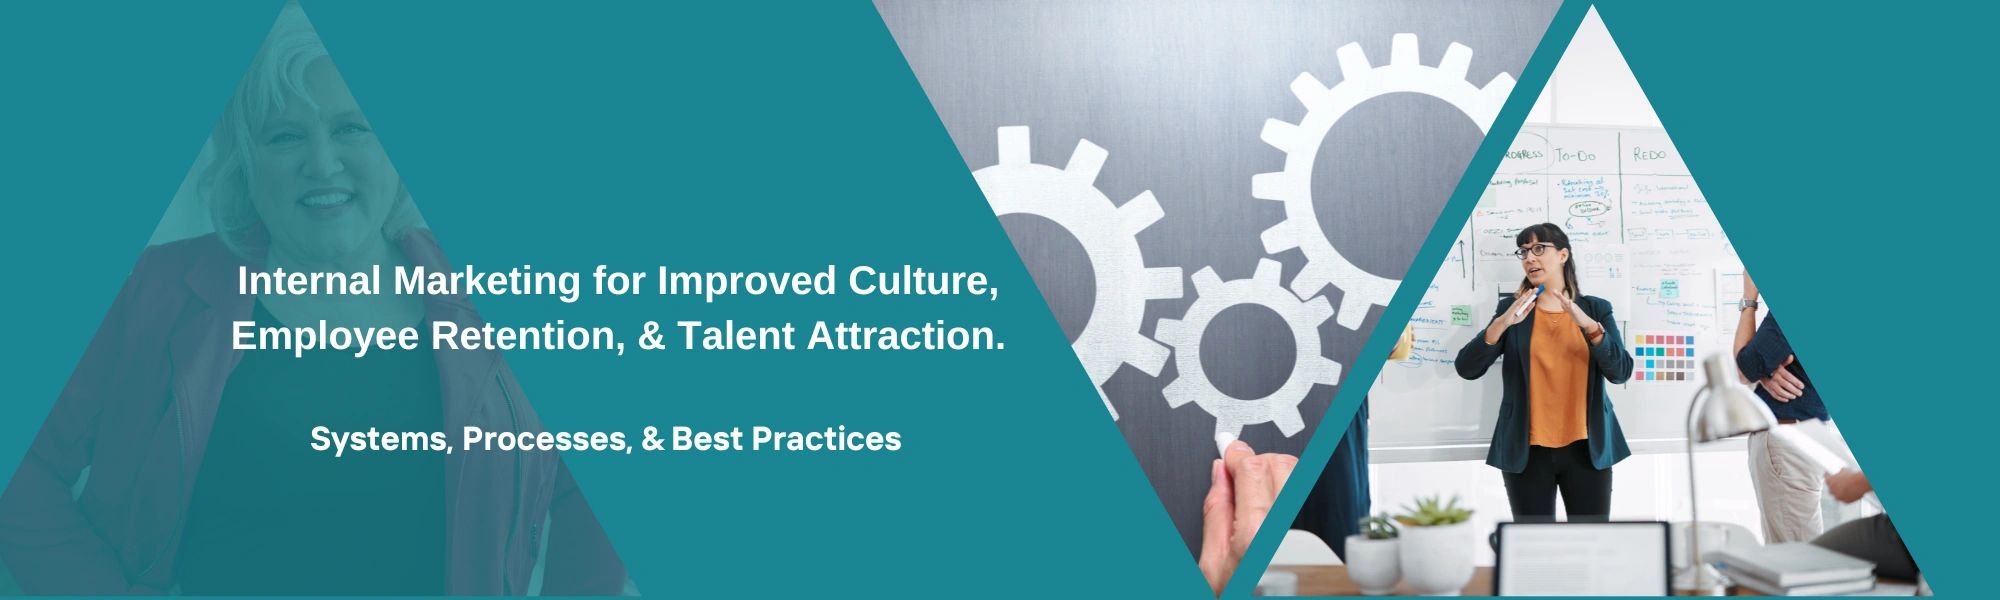 internal marketing for improved culture employee retention and talent attraction. systems processes 